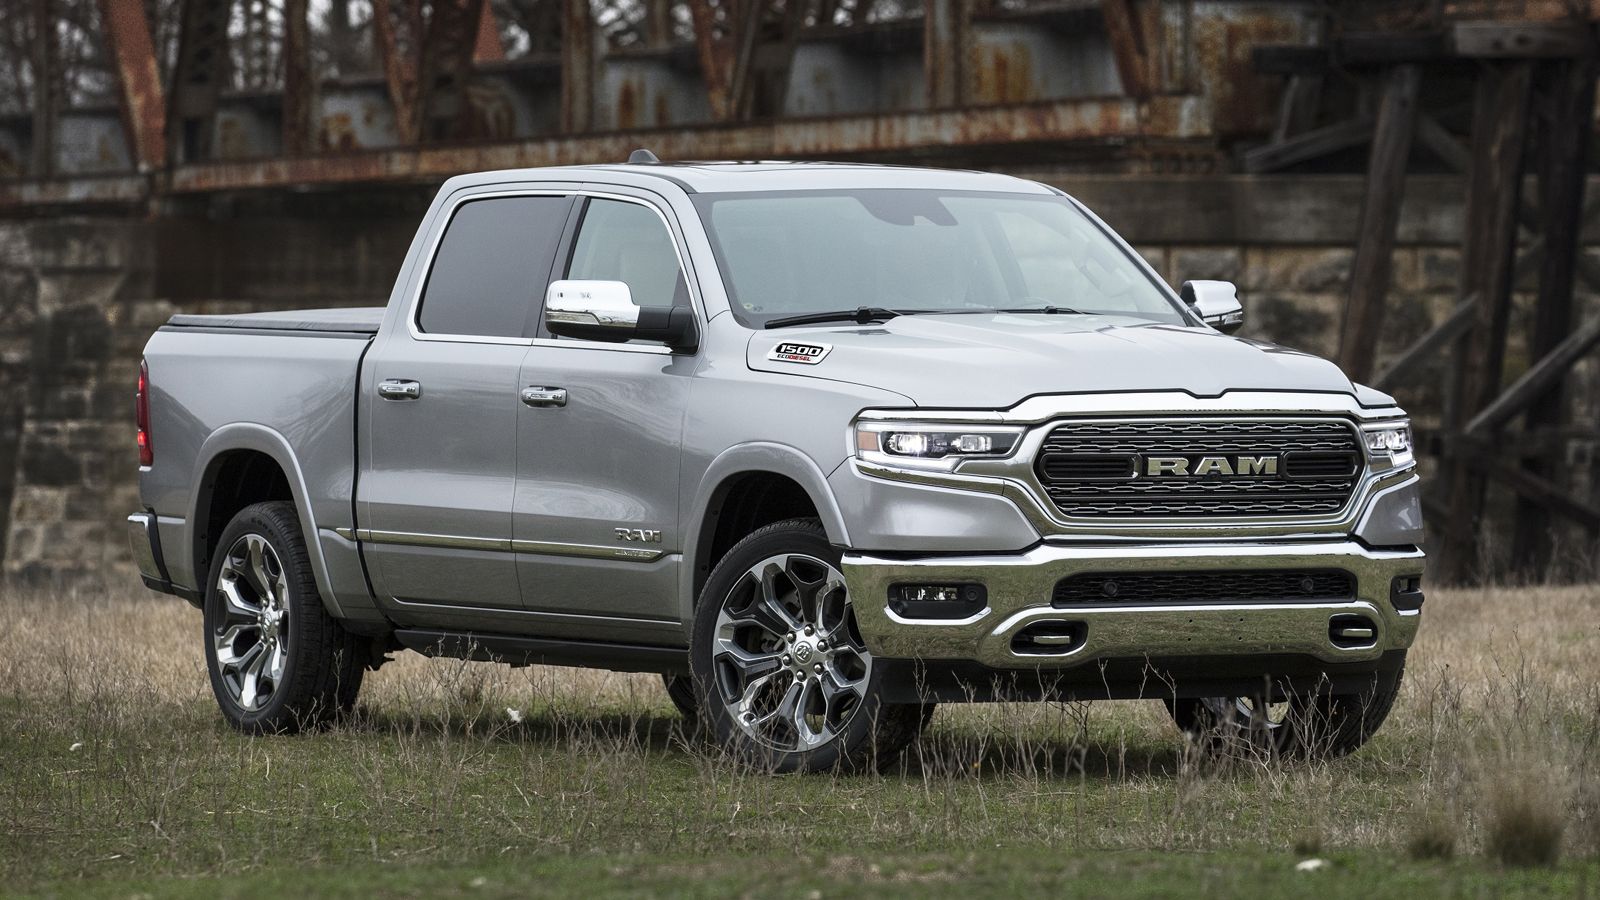 Salida definido Empeorando 2020 Ram 1500 EcoDiesel is a 3.0-liter turbocharged V6 making 260 hp and  480 lb-ft of torque